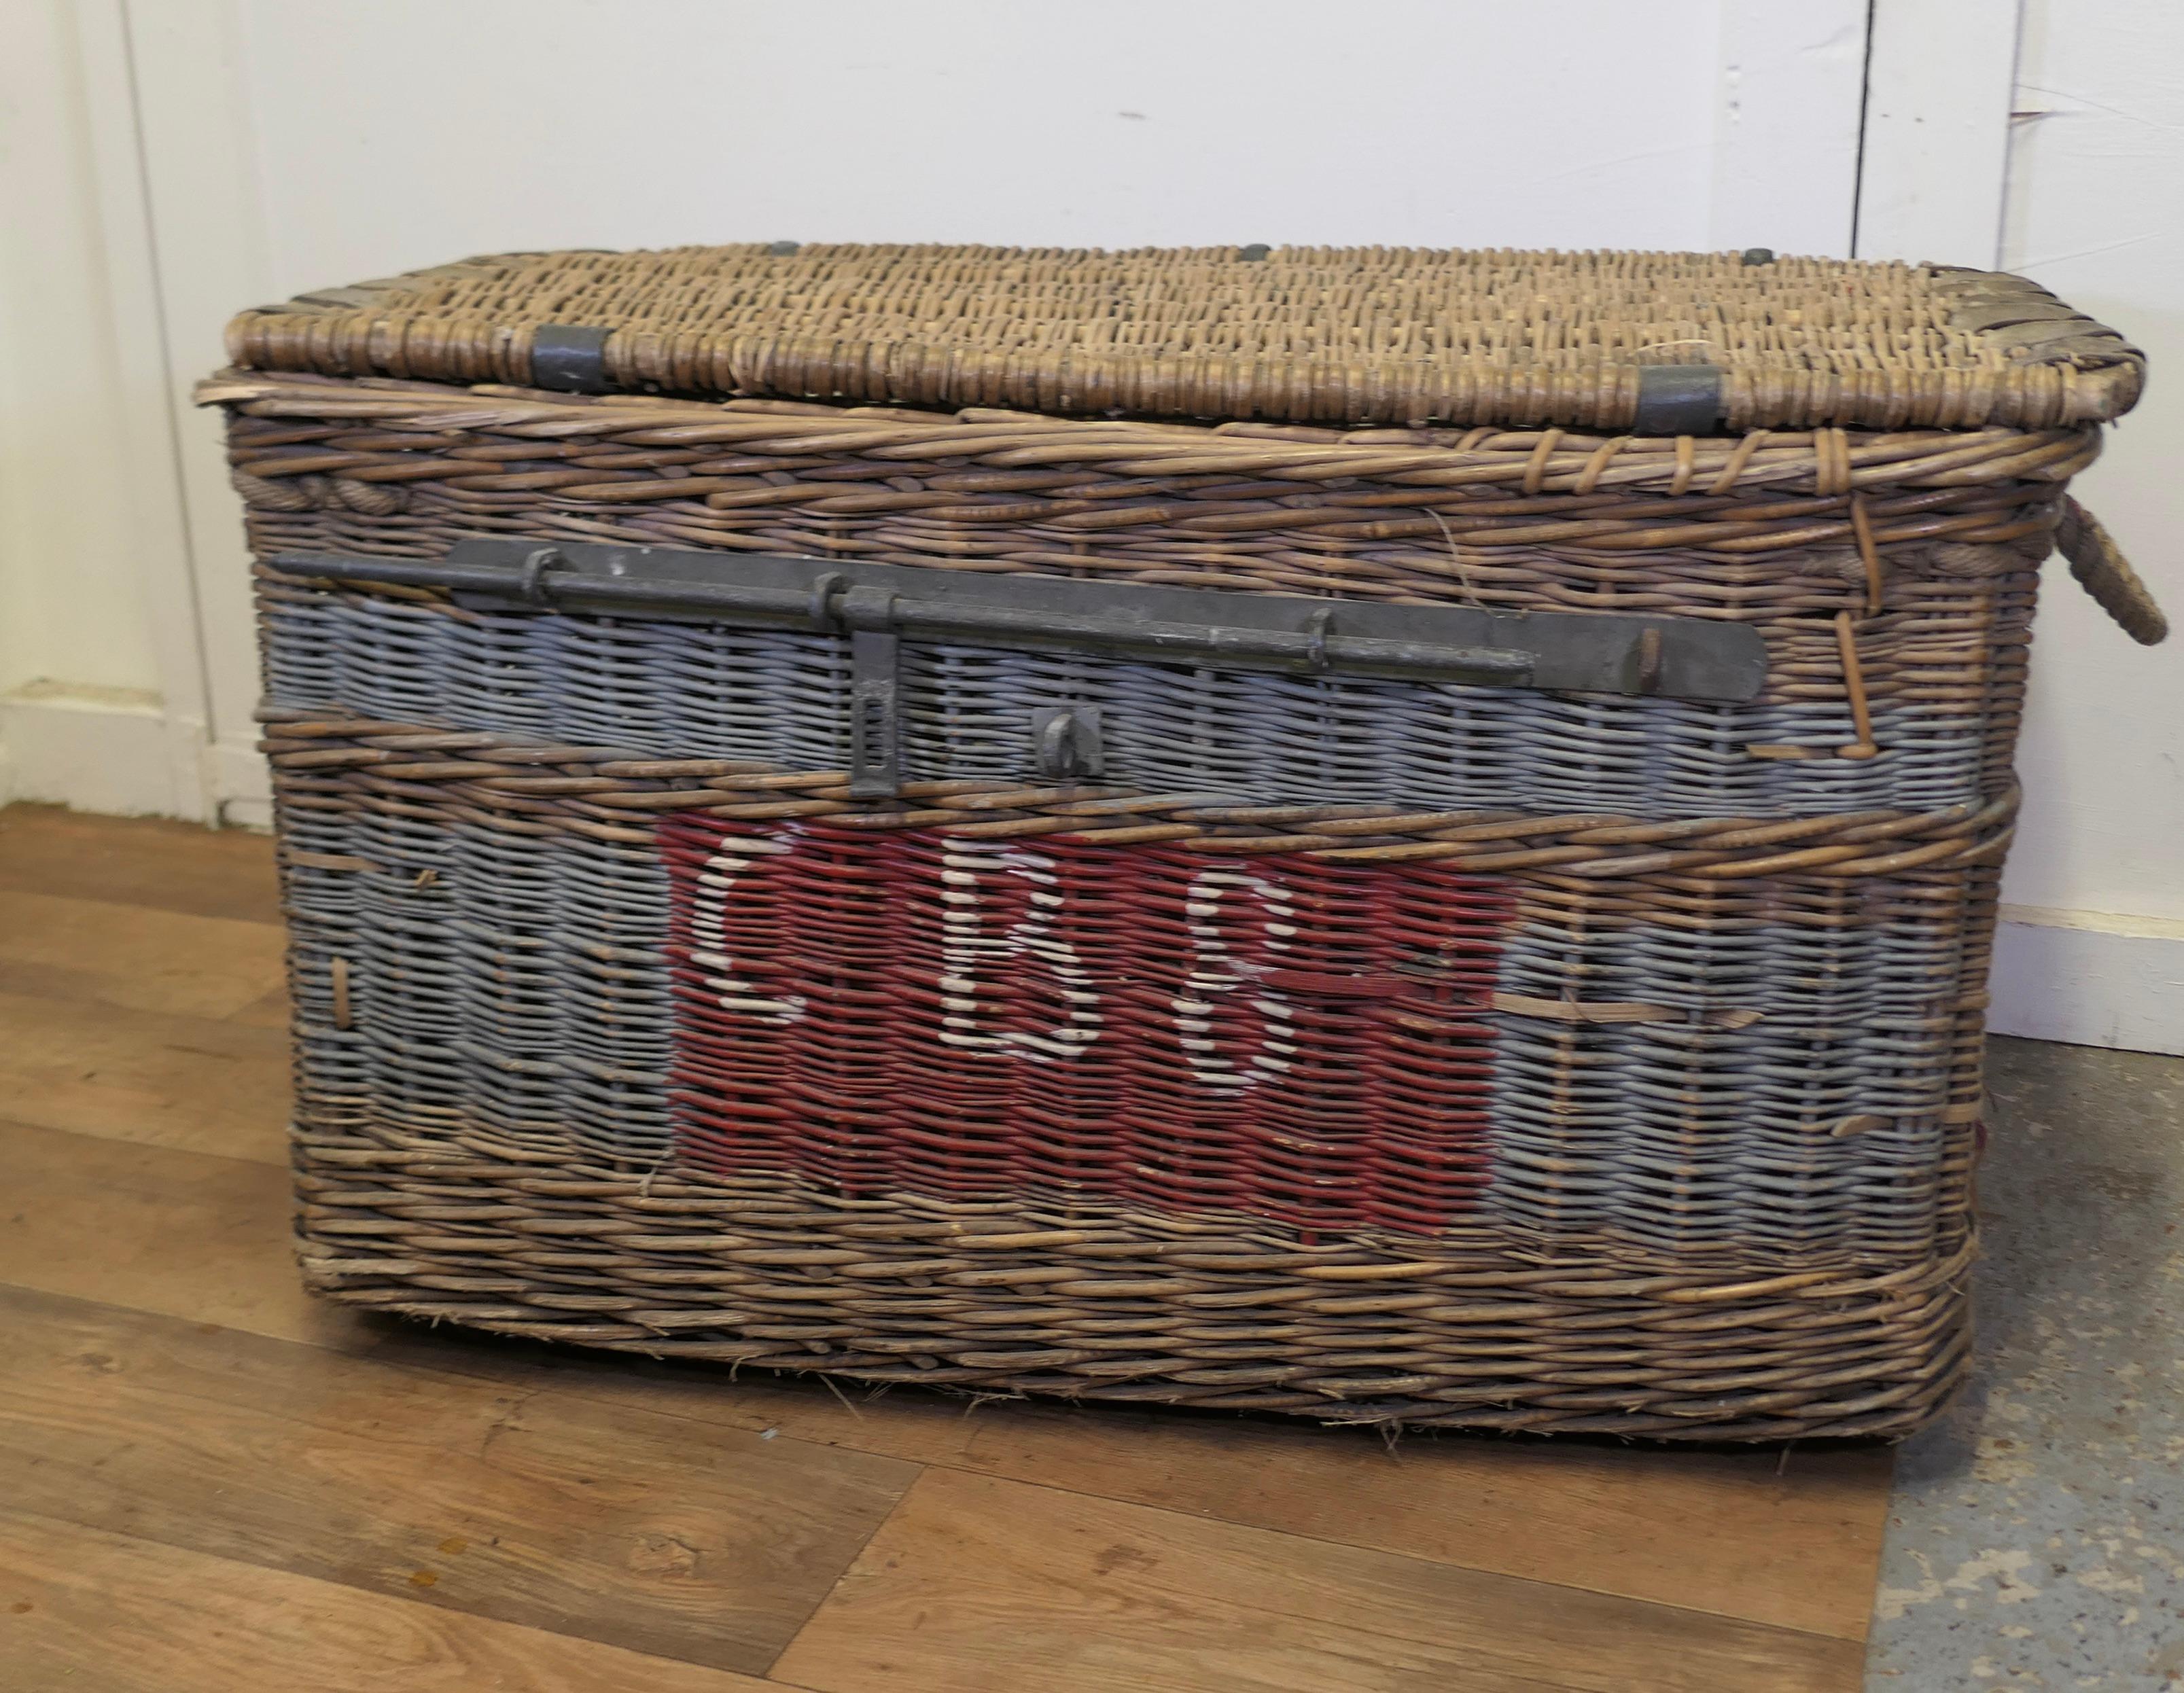 Huge Wicker Railway Parcel Hamper
Very strong and attractive piece, from the South of England, the basket has CB8 painted on both sides front and back  
In very good, complete condition, with the original iron locking clasp and rope carrying